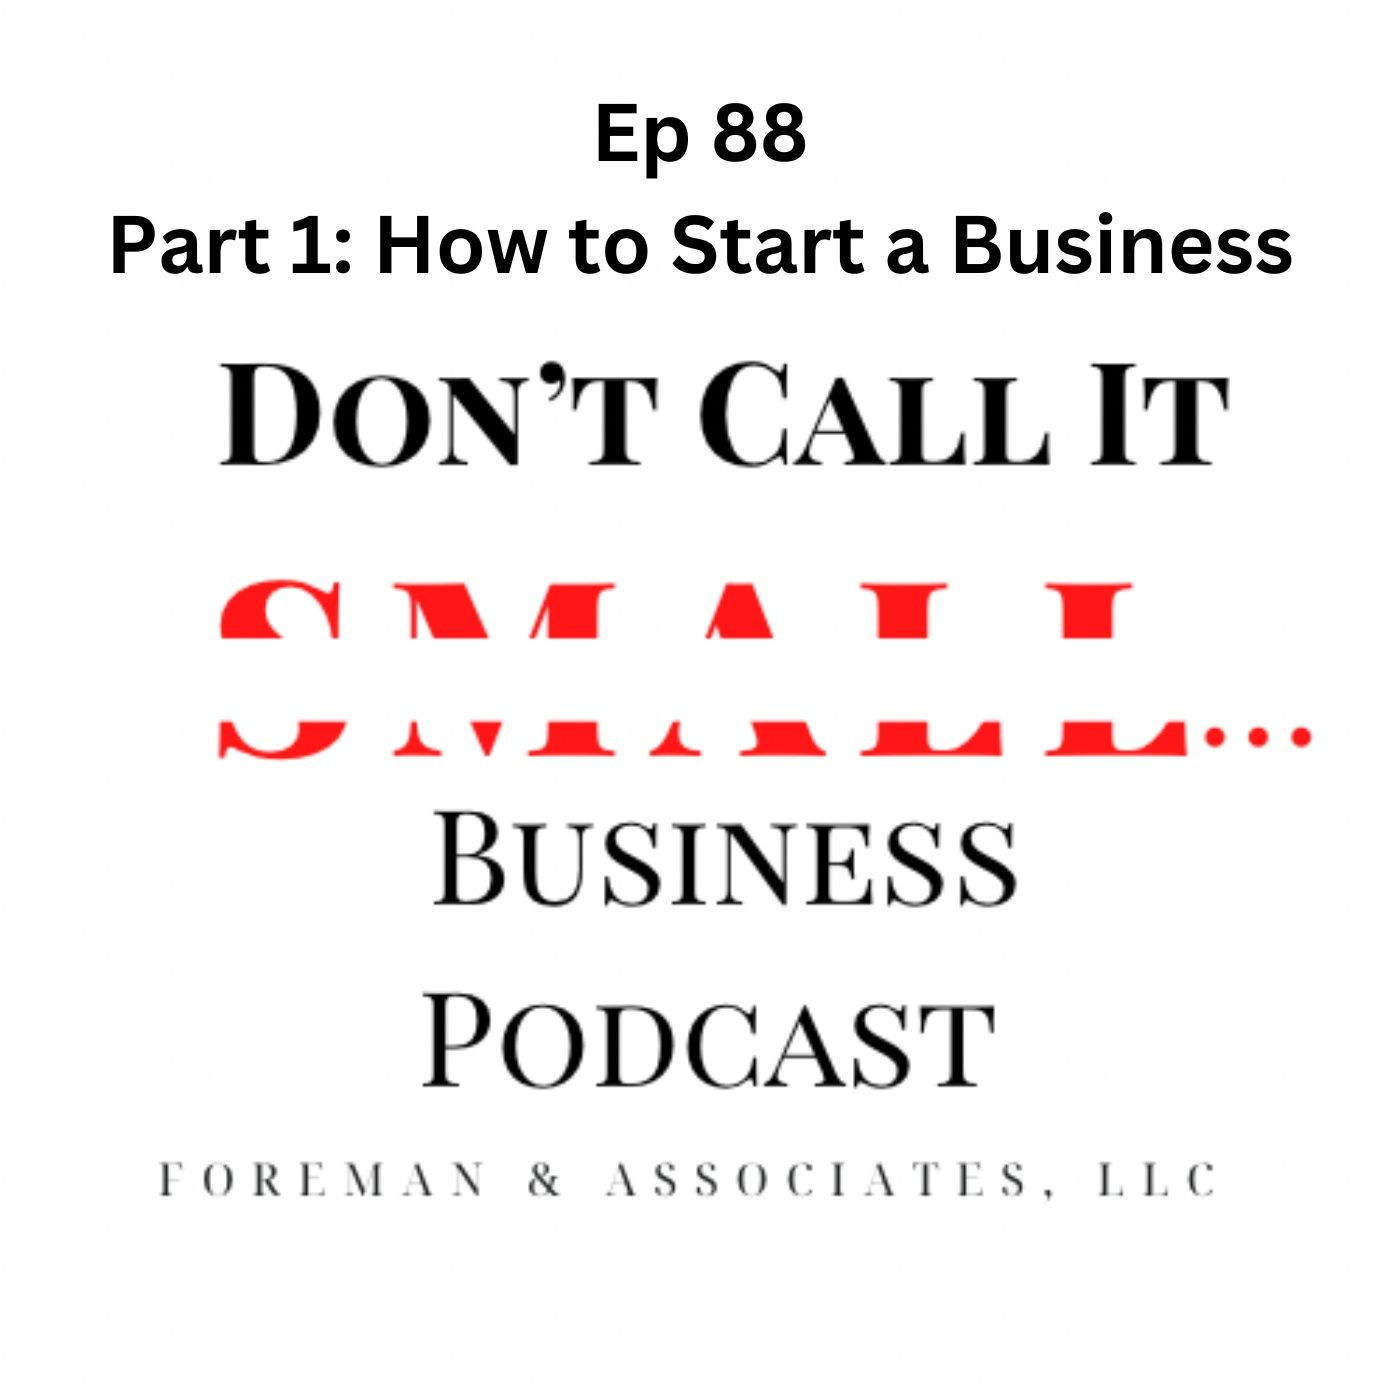 EP 88 Part 1 How to Start a Business